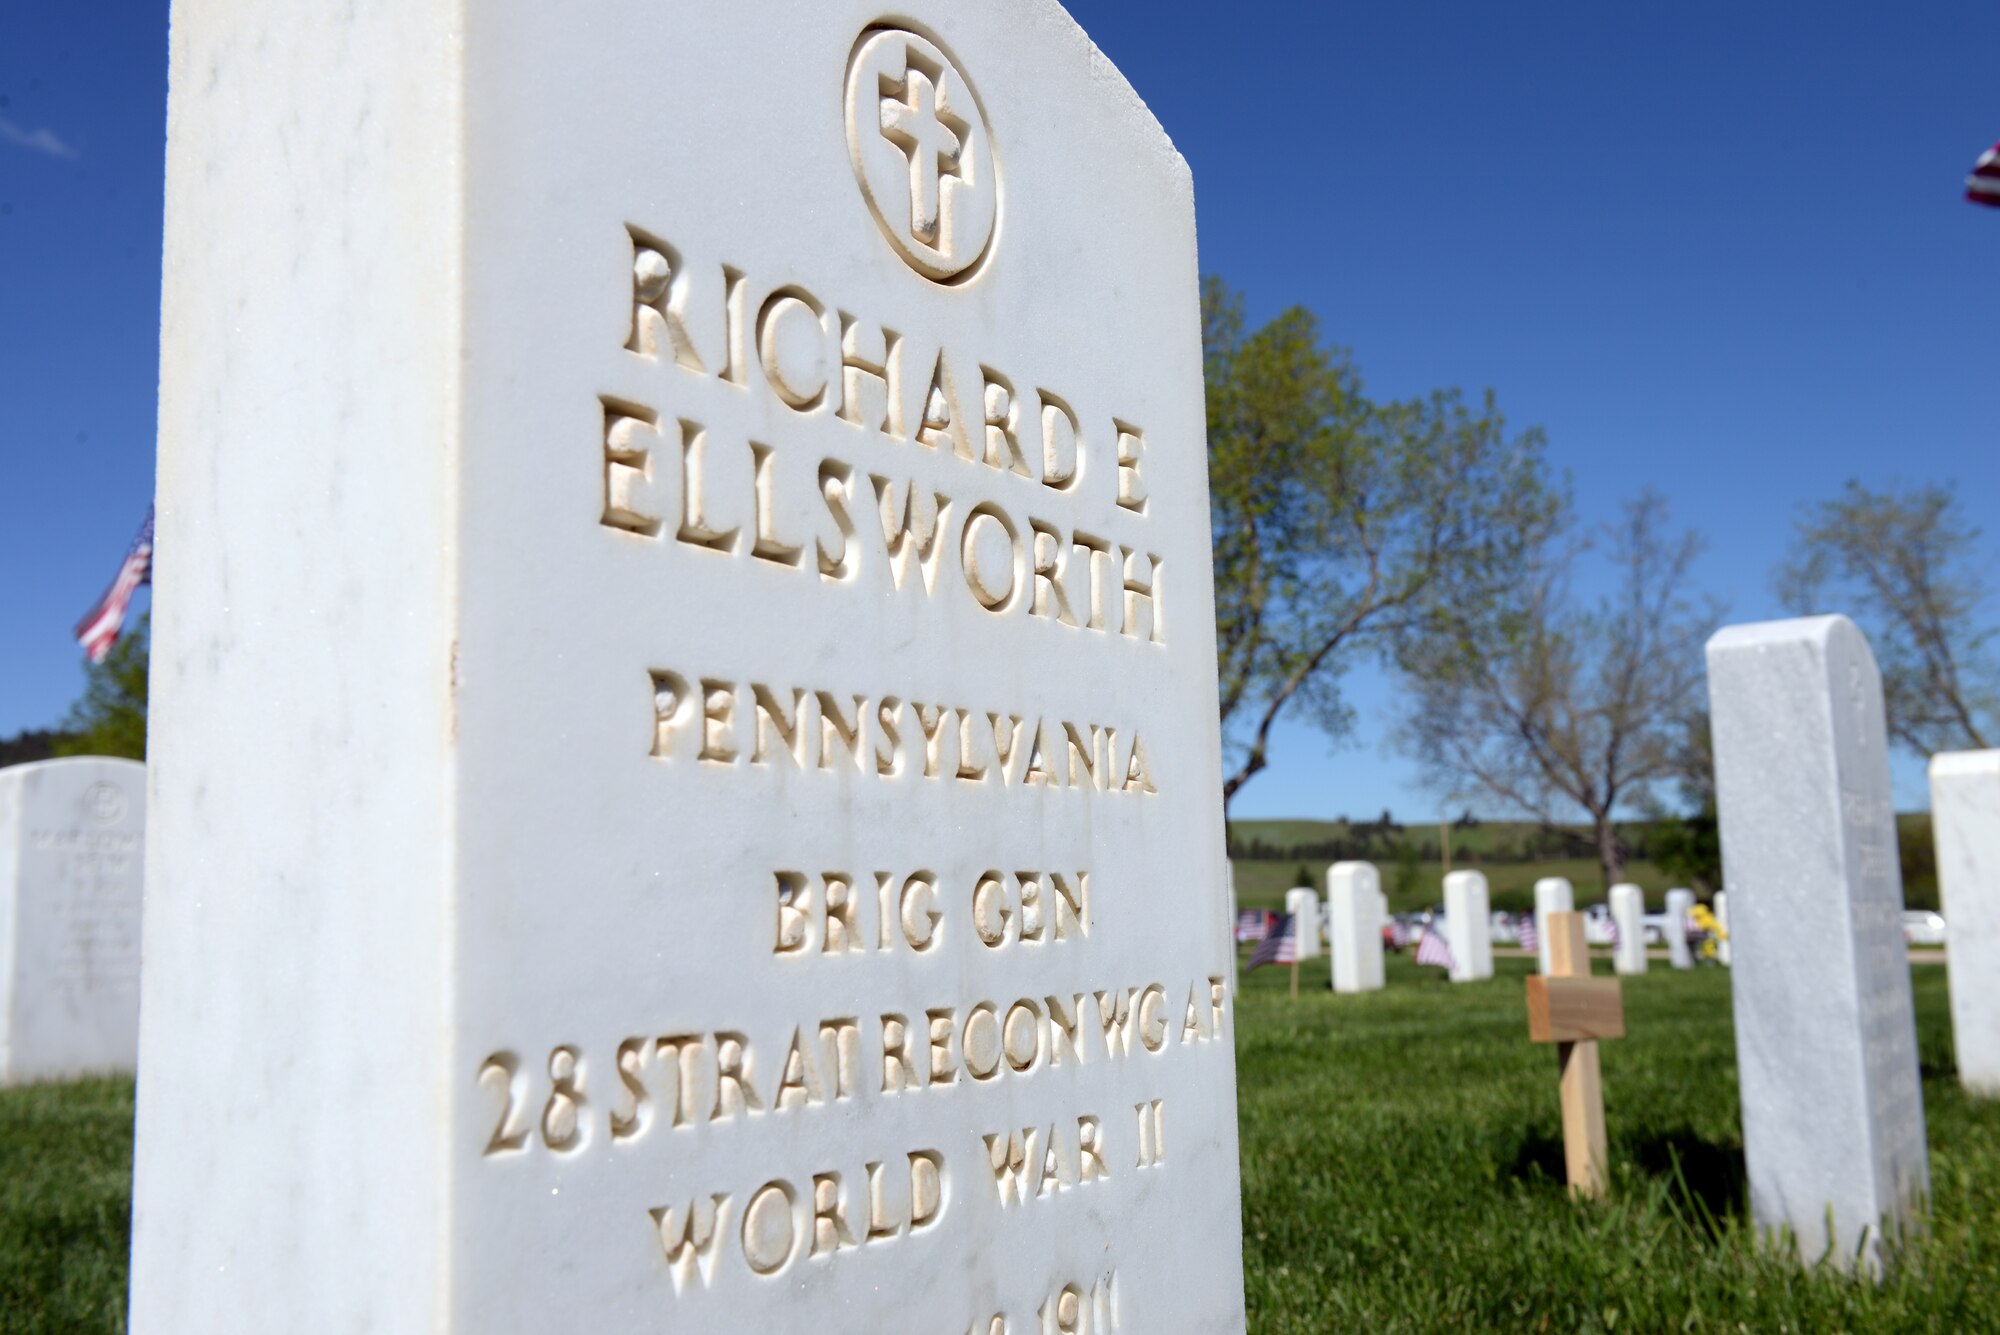 Brig. Gen. Richard Ellsworth’s gravestone stands decorated at the Black Hills National Cemetery, S.D., May 29, 2017. Ellsworth was the 28th Strategic Reconnaissance Wing commander before he was killed in a plane crash March 18, 1953. (U.S. Air Force photo by Airman Nicolas Z. Erwin)